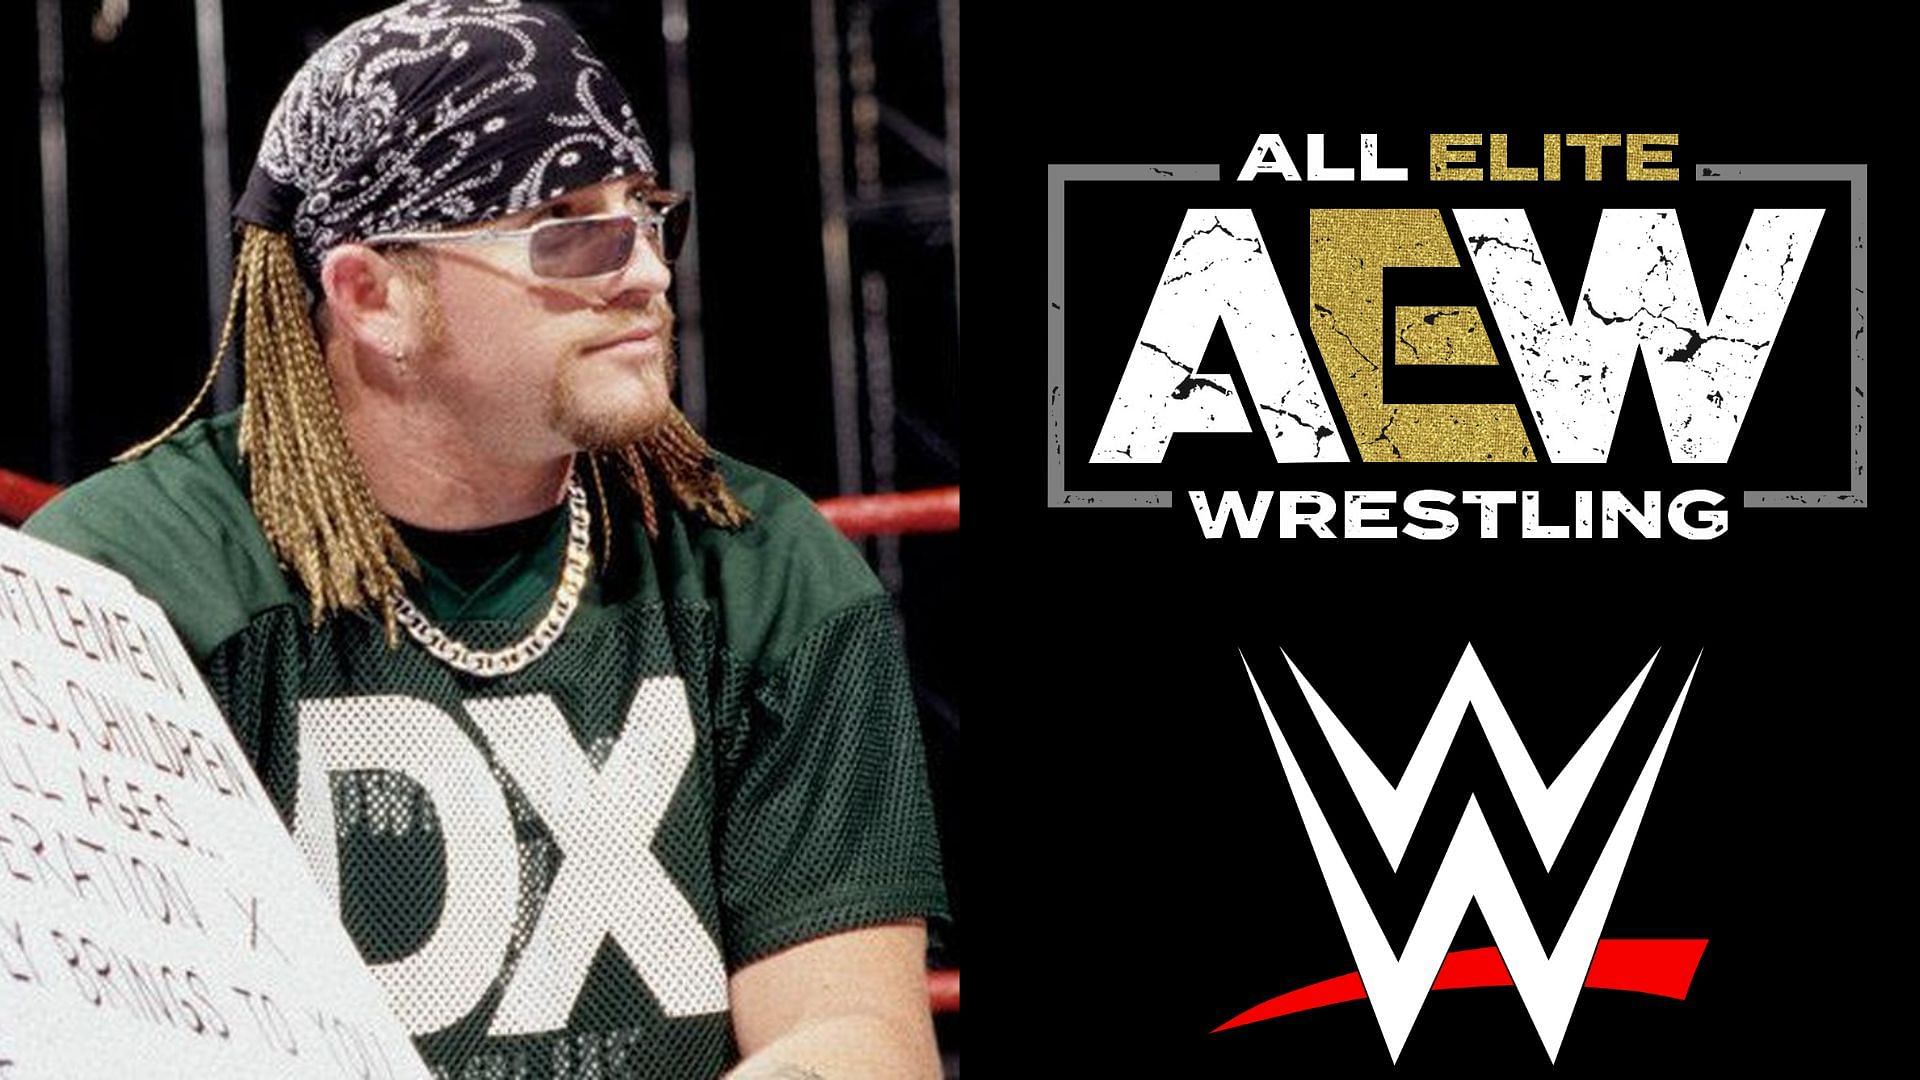 Who is in the right between Road Dogg and this AEW star?